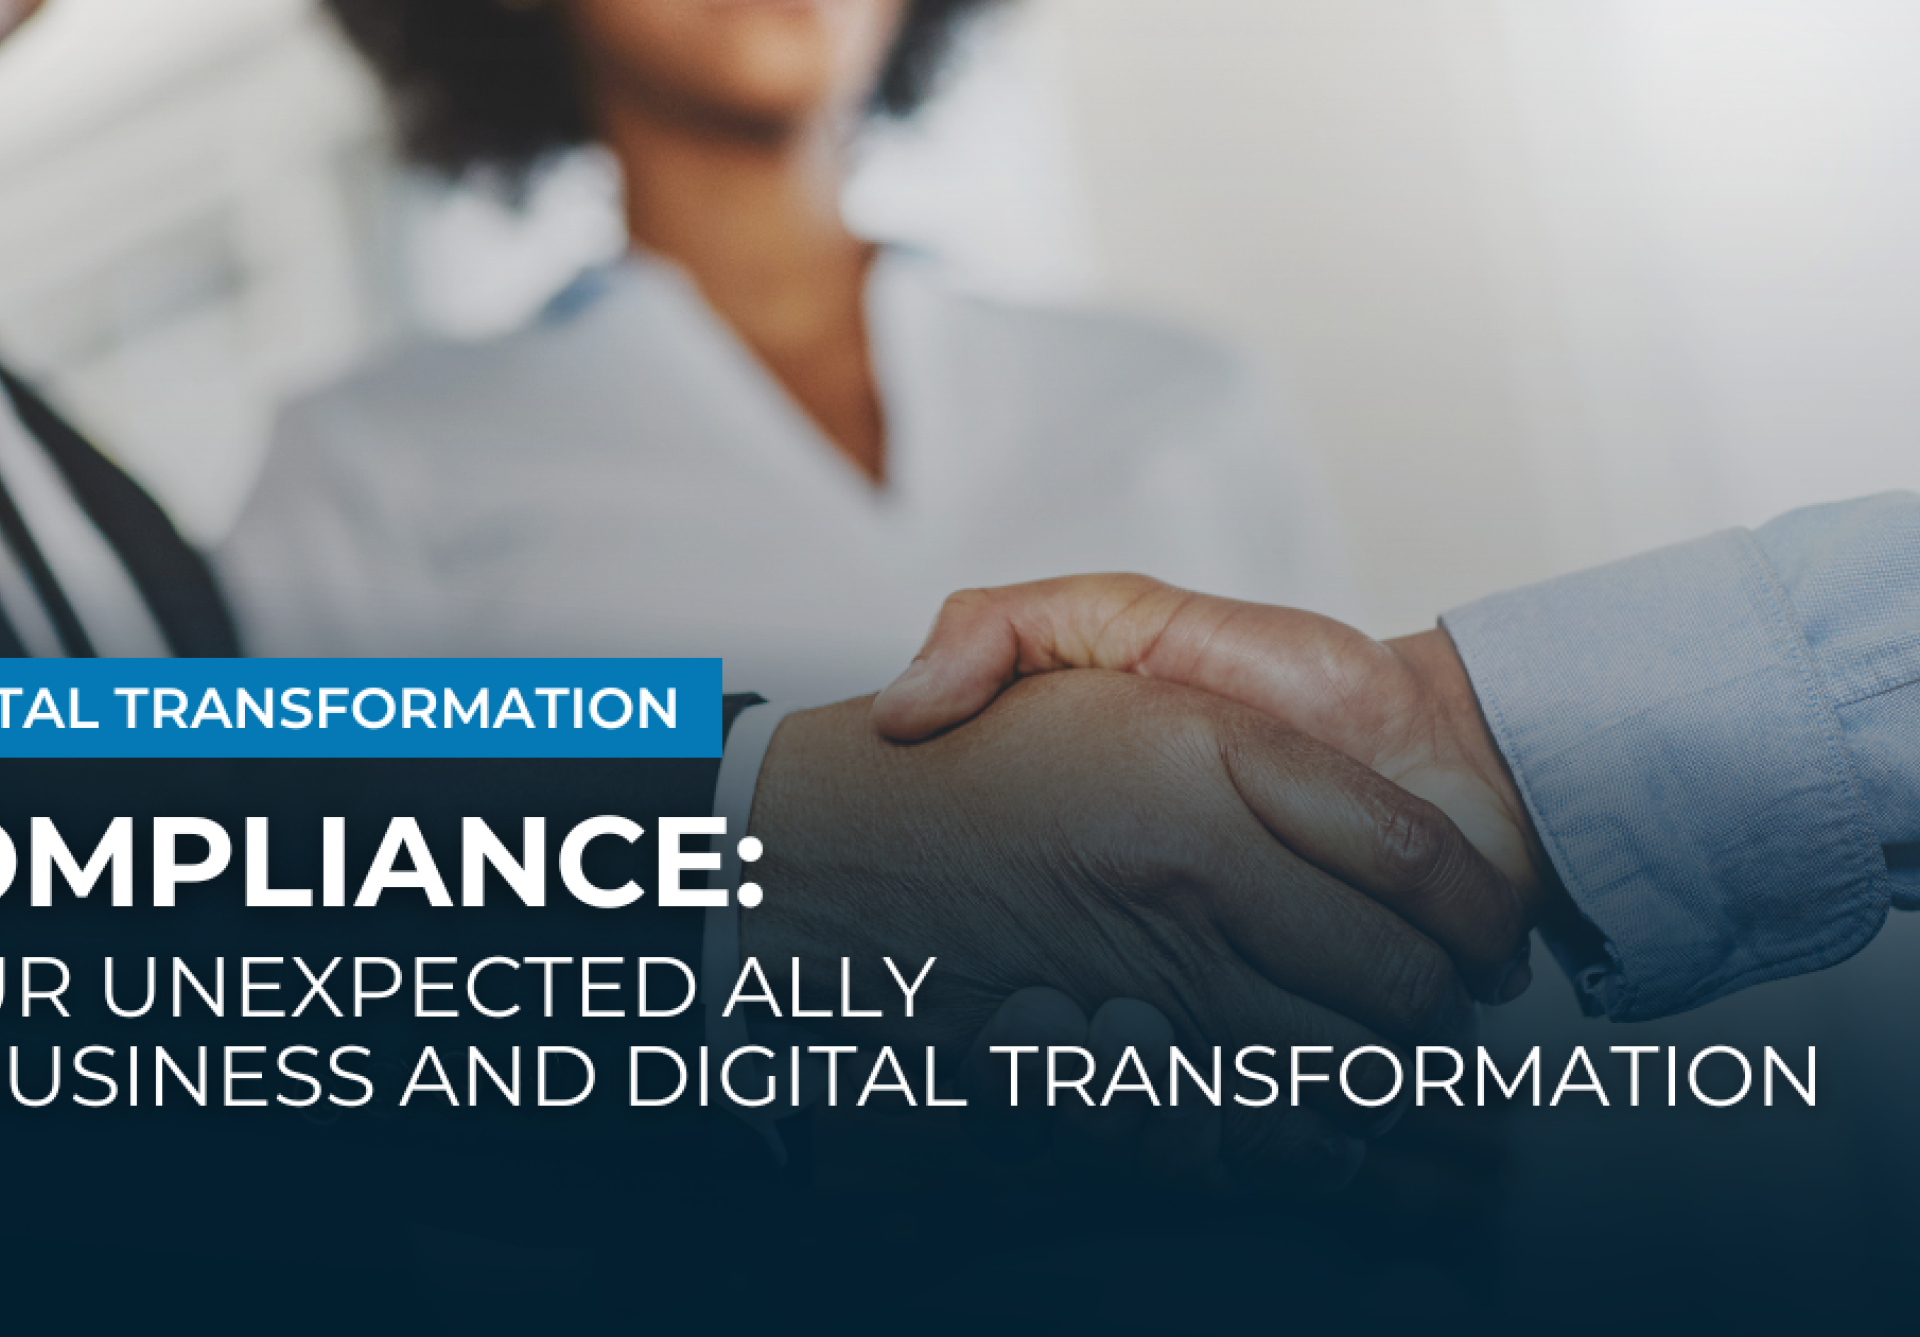 Compliance: Your Unexpected Ally in Business and Digital Transformation